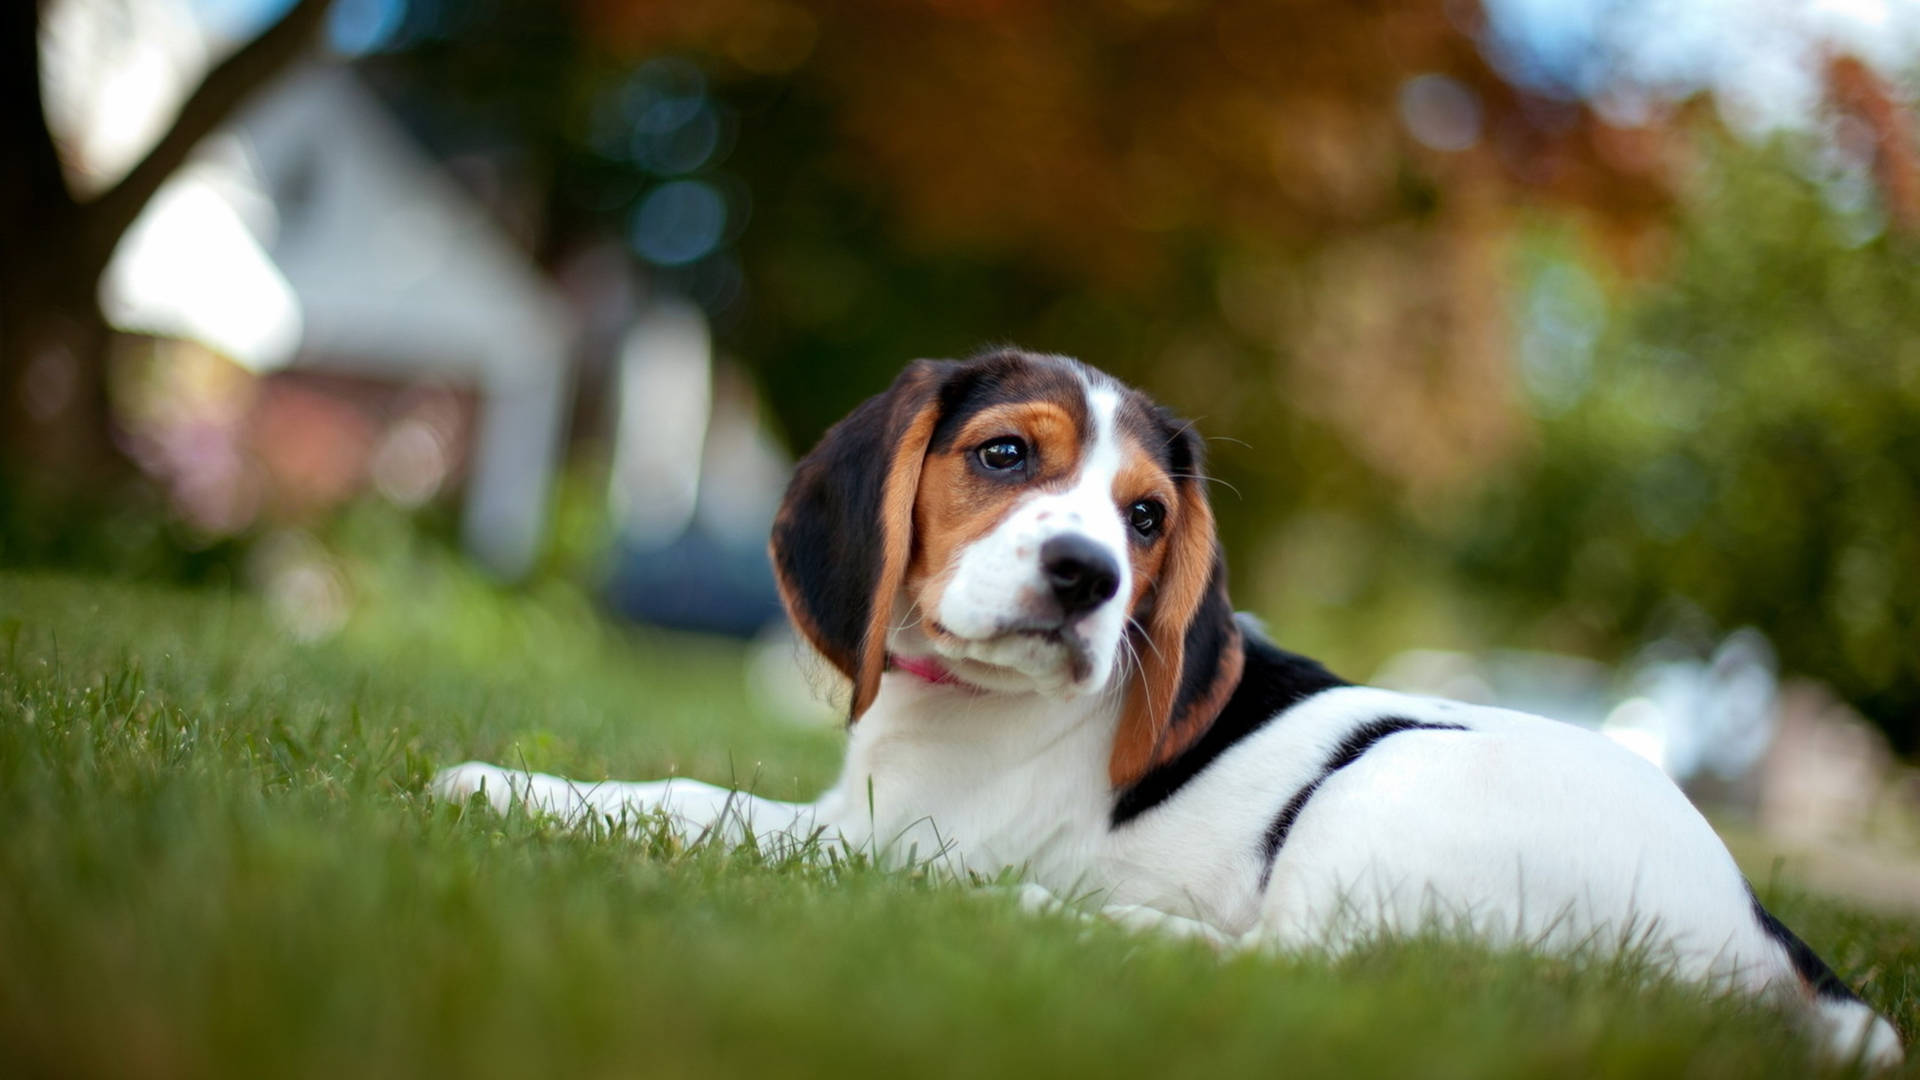 Cute Beagle Dog Relaxing On Grass Background